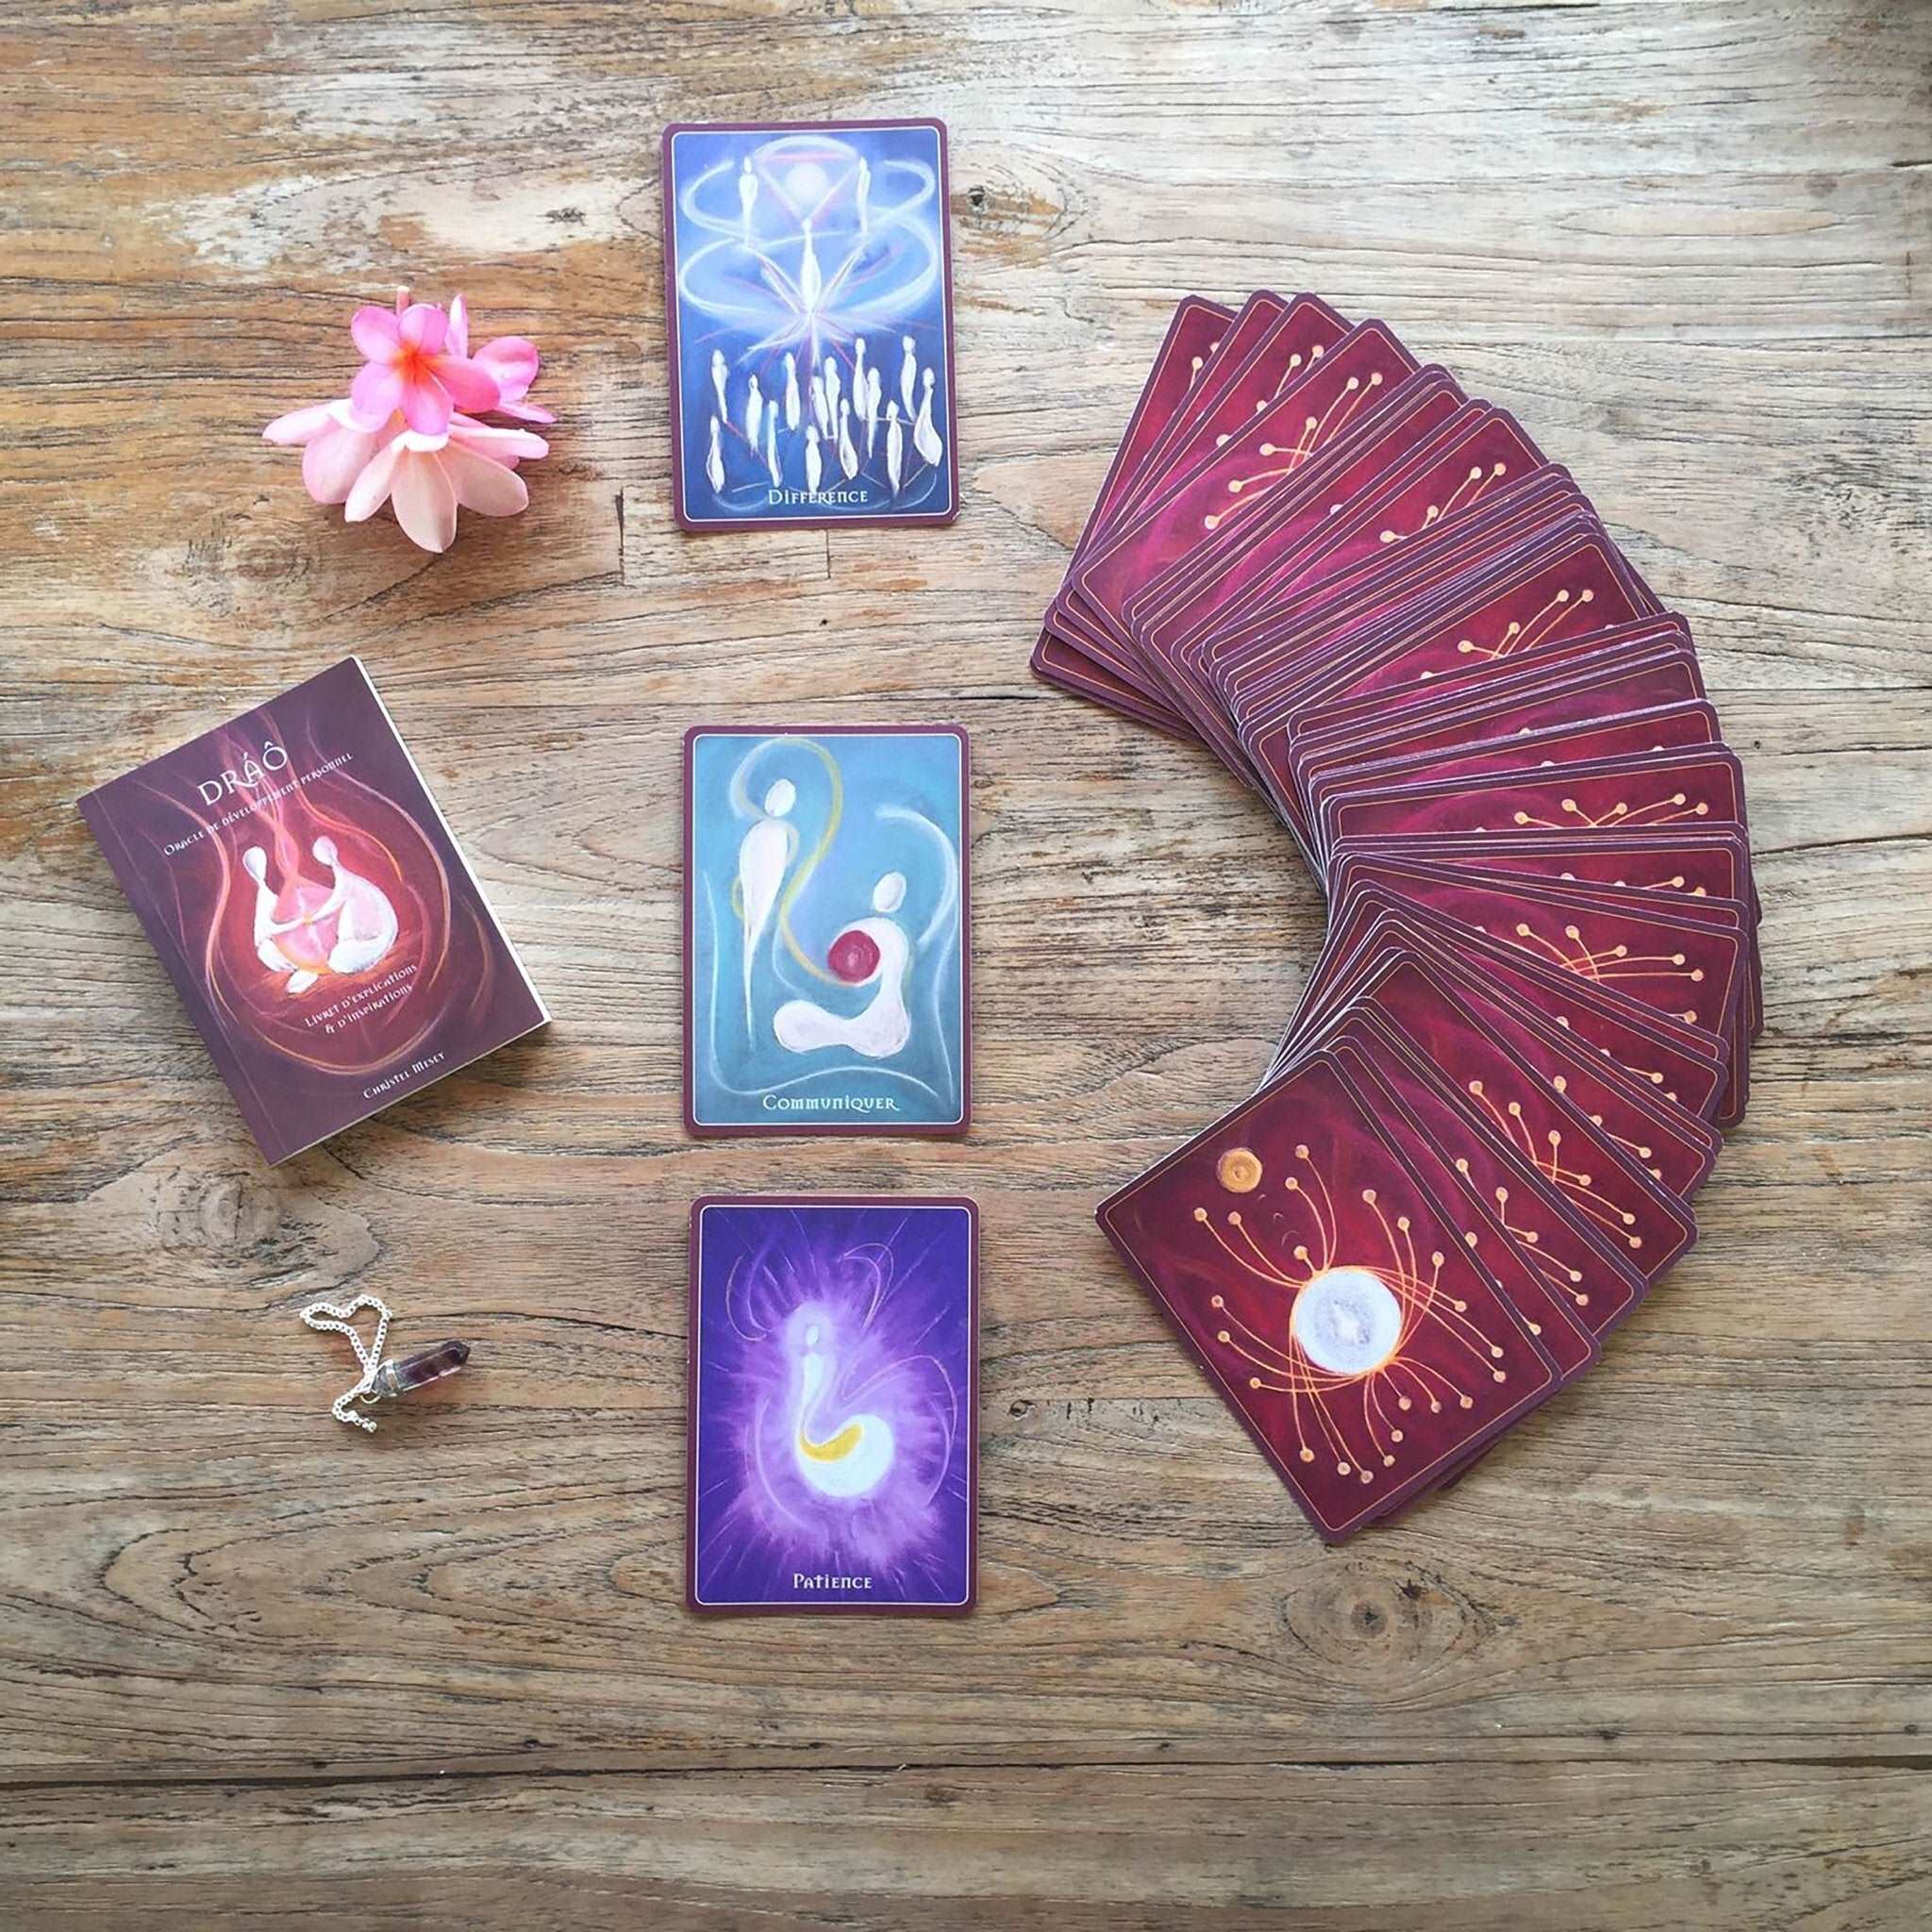 DRAO ORACLE DECK - Personal growth inspirational cards (French AND English) - Christel Mesey Art